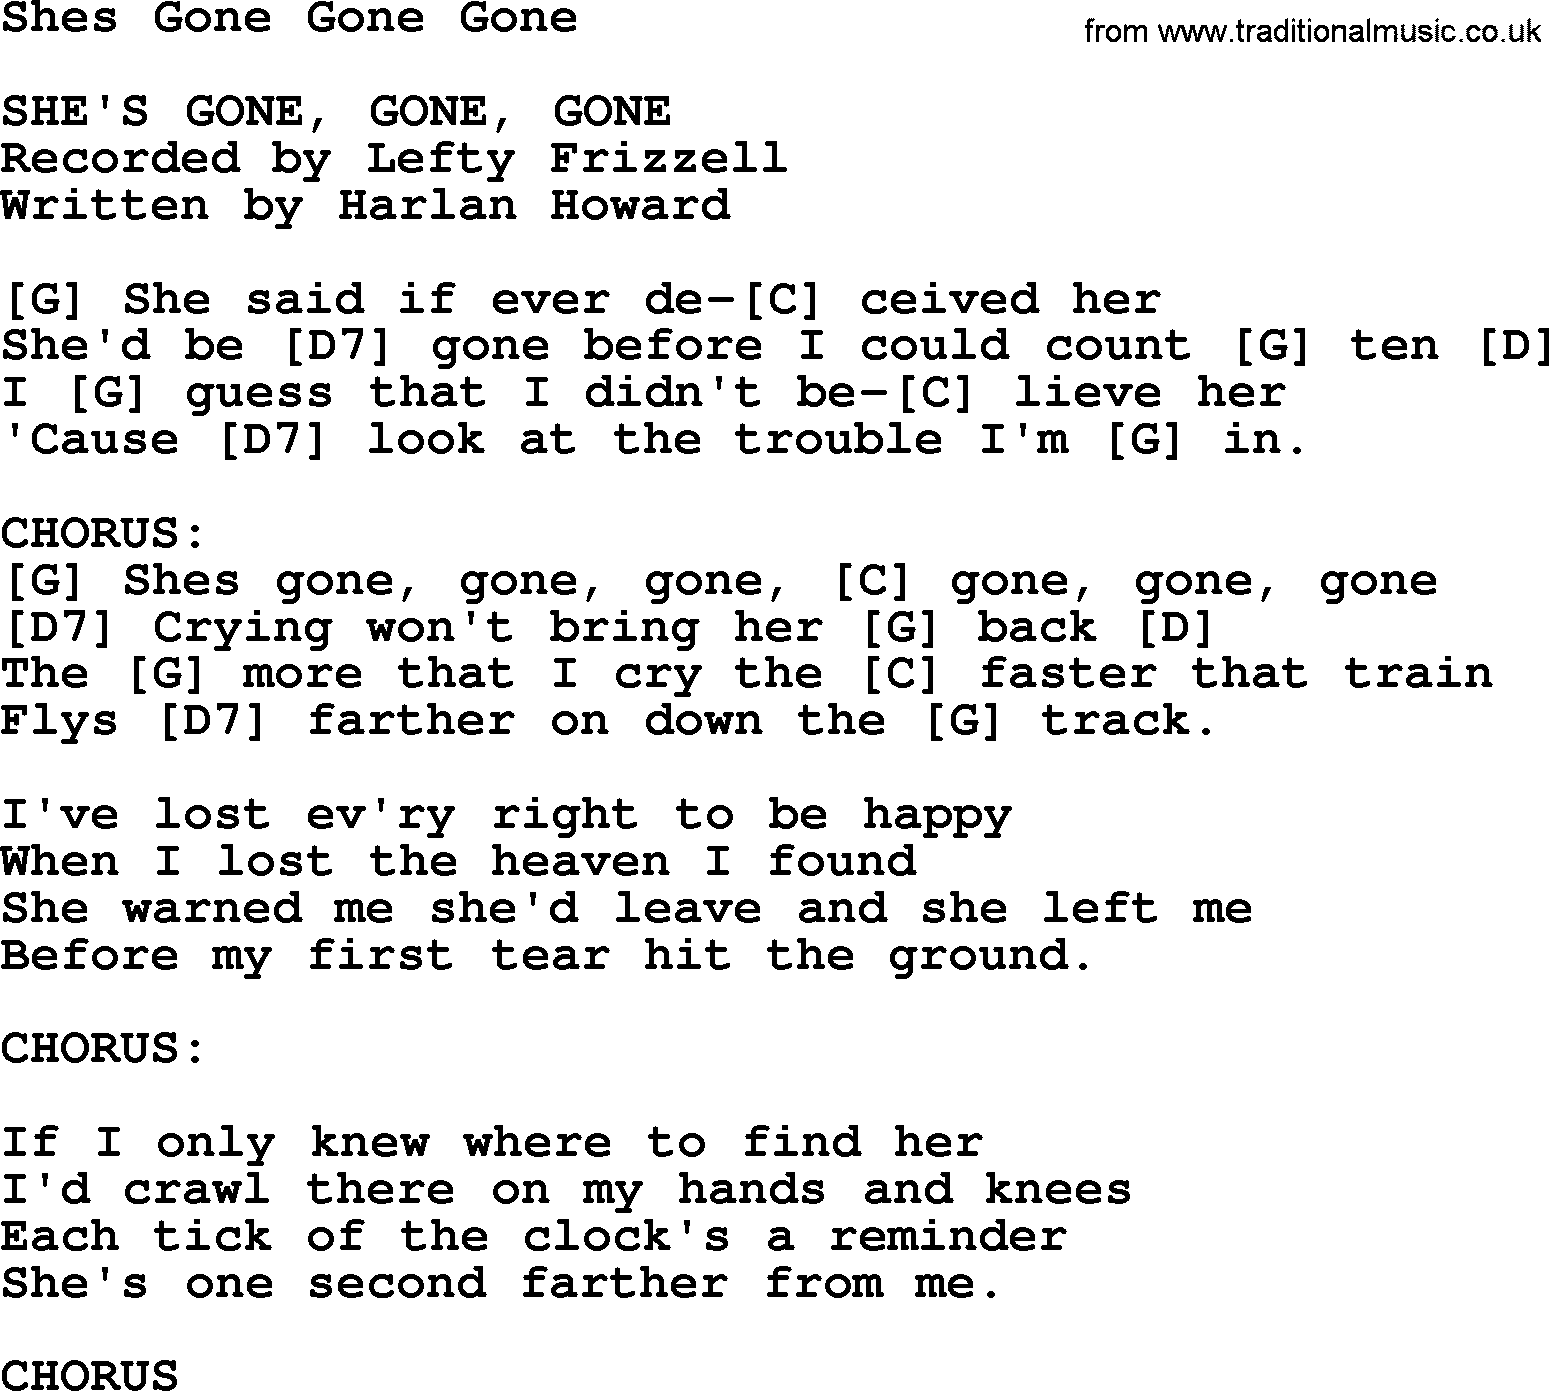 Bluegrass song: Shes Gone Gone Gone, lyrics and chords